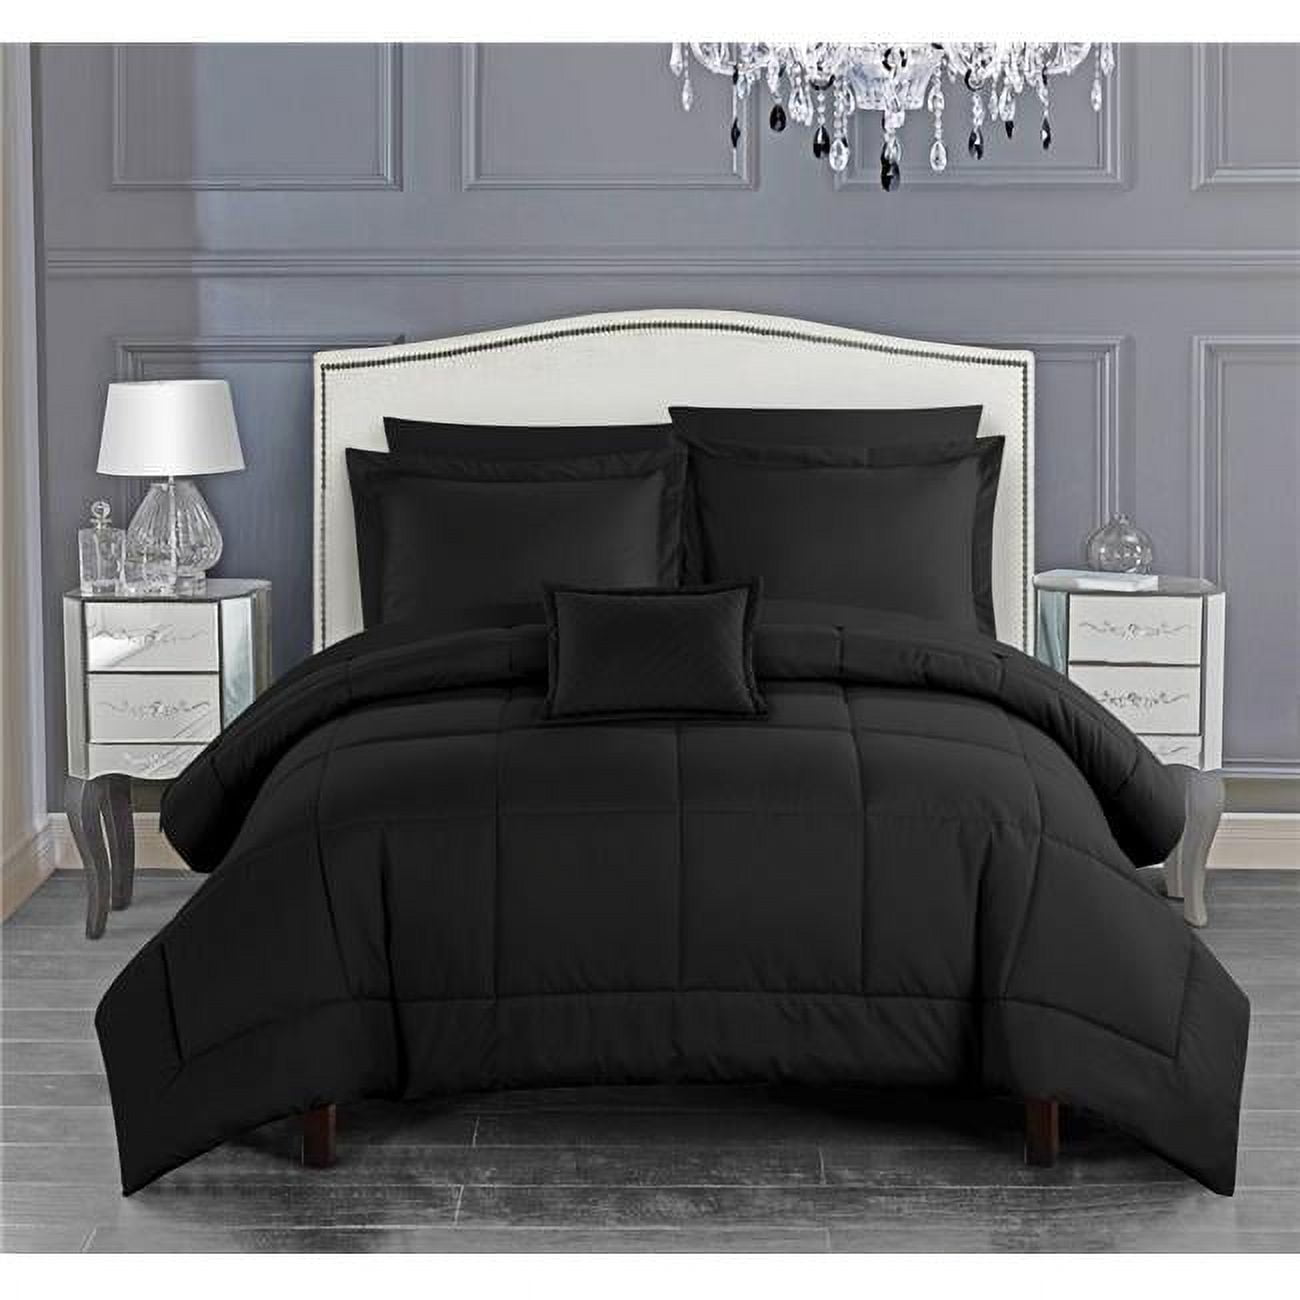 King Size Josaia Comforter Set Pieced Solid Color Stitched Design Bed In A Bedding Sheets & Decorative Pillow Shams Included, Black - 8 Piece